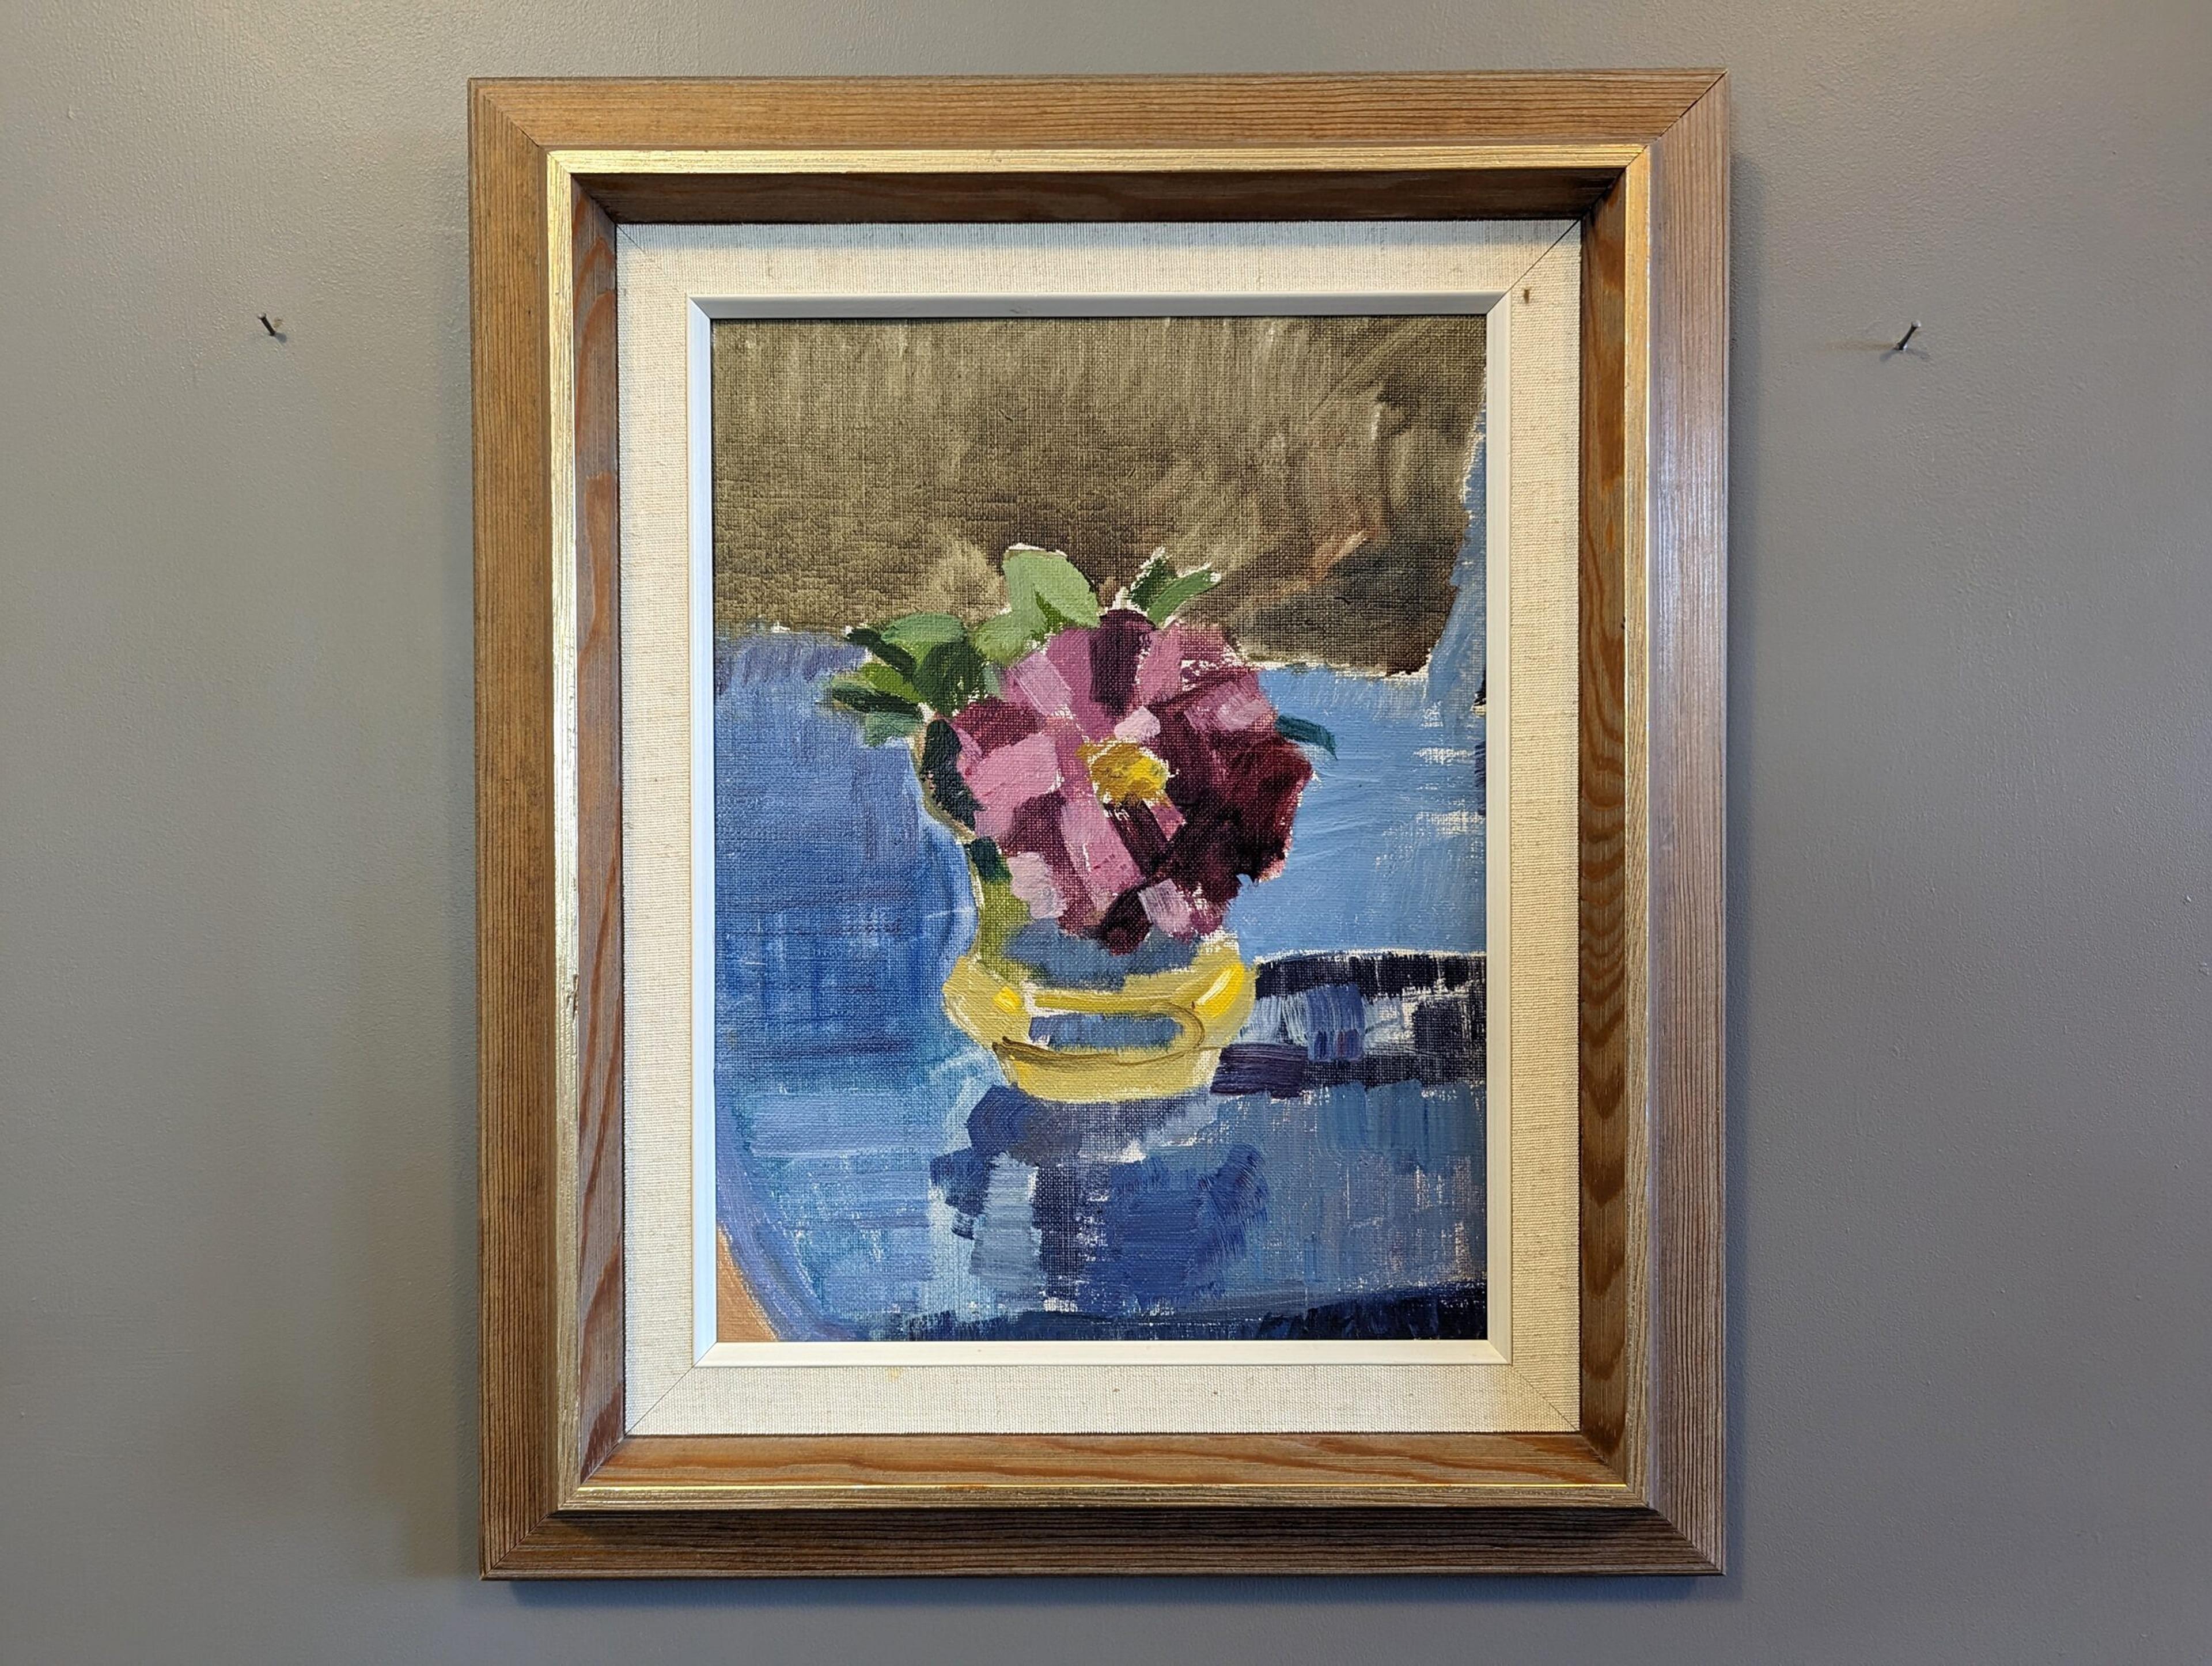 WILD ROSE 
Size: 47 x 39 cm (including frame)
Oil on Canvas

A characterful mid-century modernist still life composition, executed in oil onto canvas.

A wild rose placed within a yellow vase takes centre stage in this composition. The pink-purple